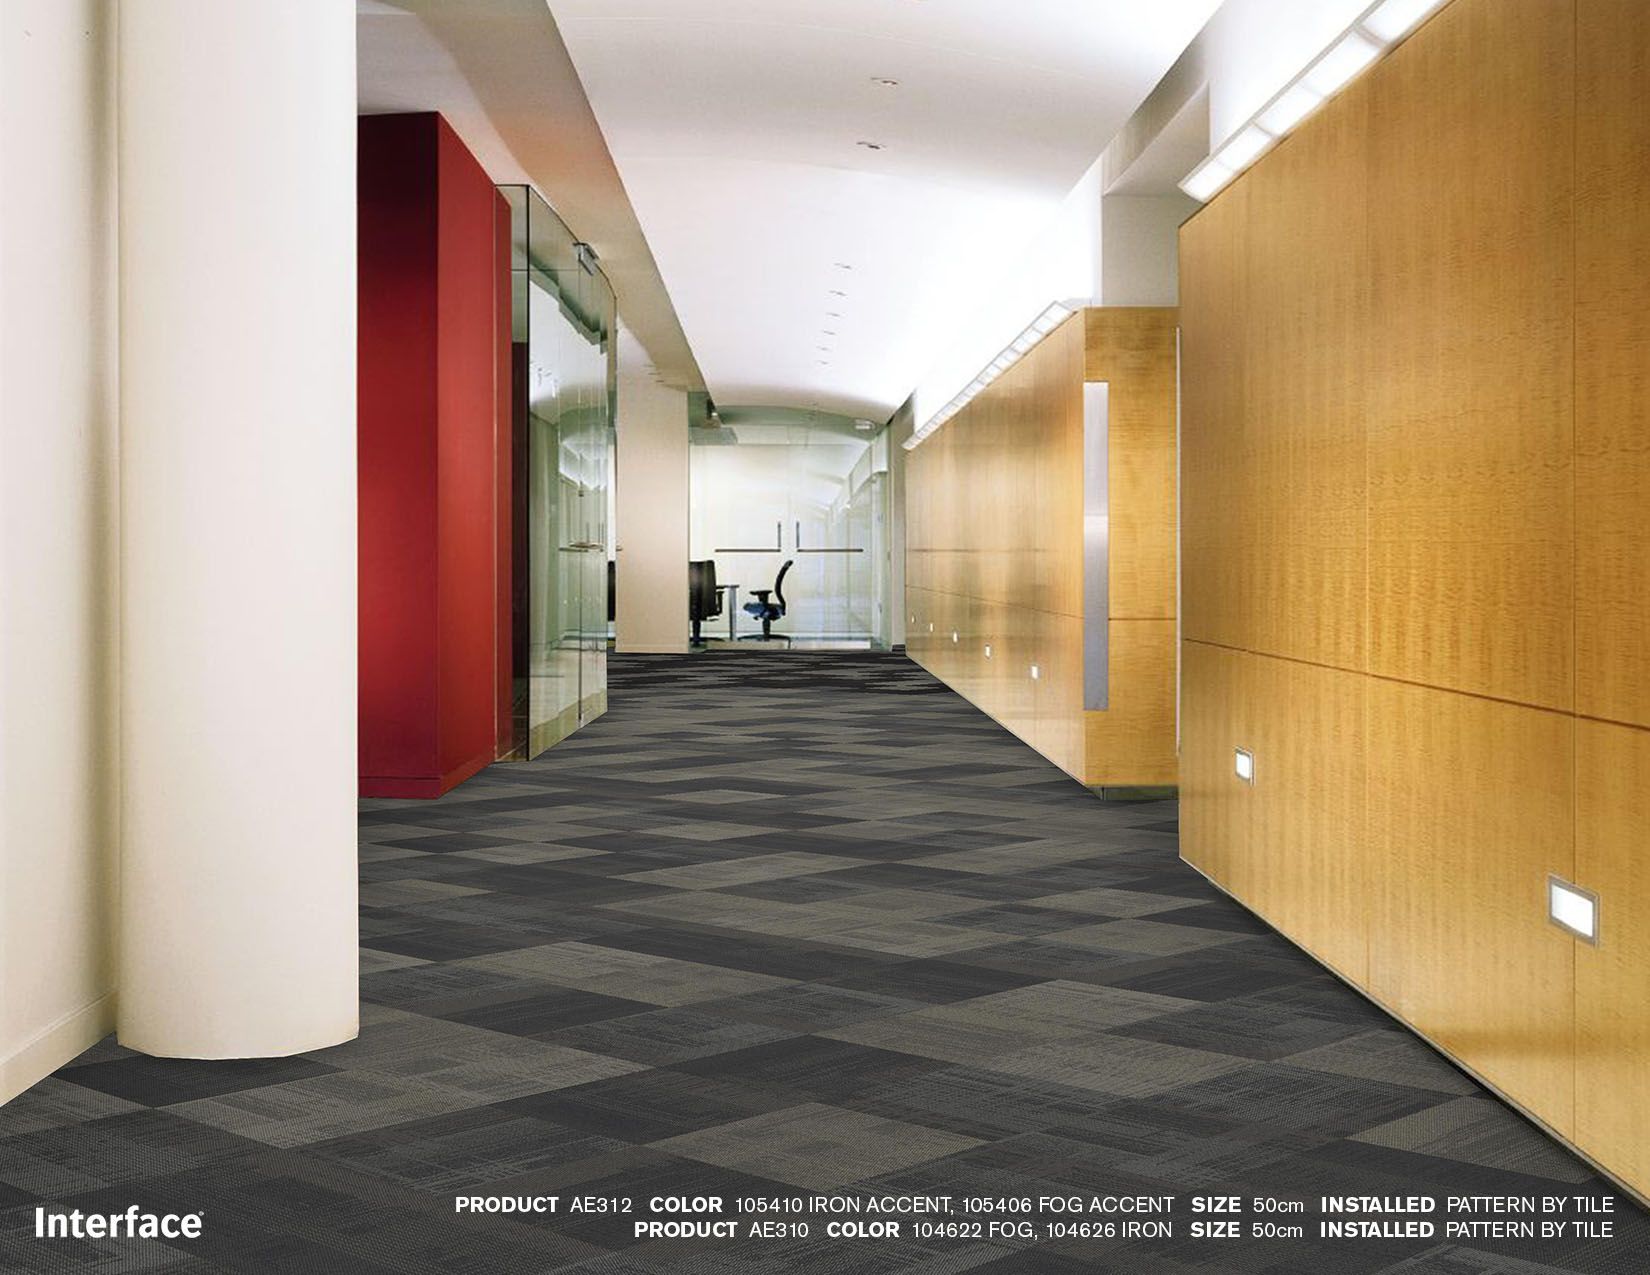 Interface SR899 and AE312 carpet tile in hallway scene image number 2